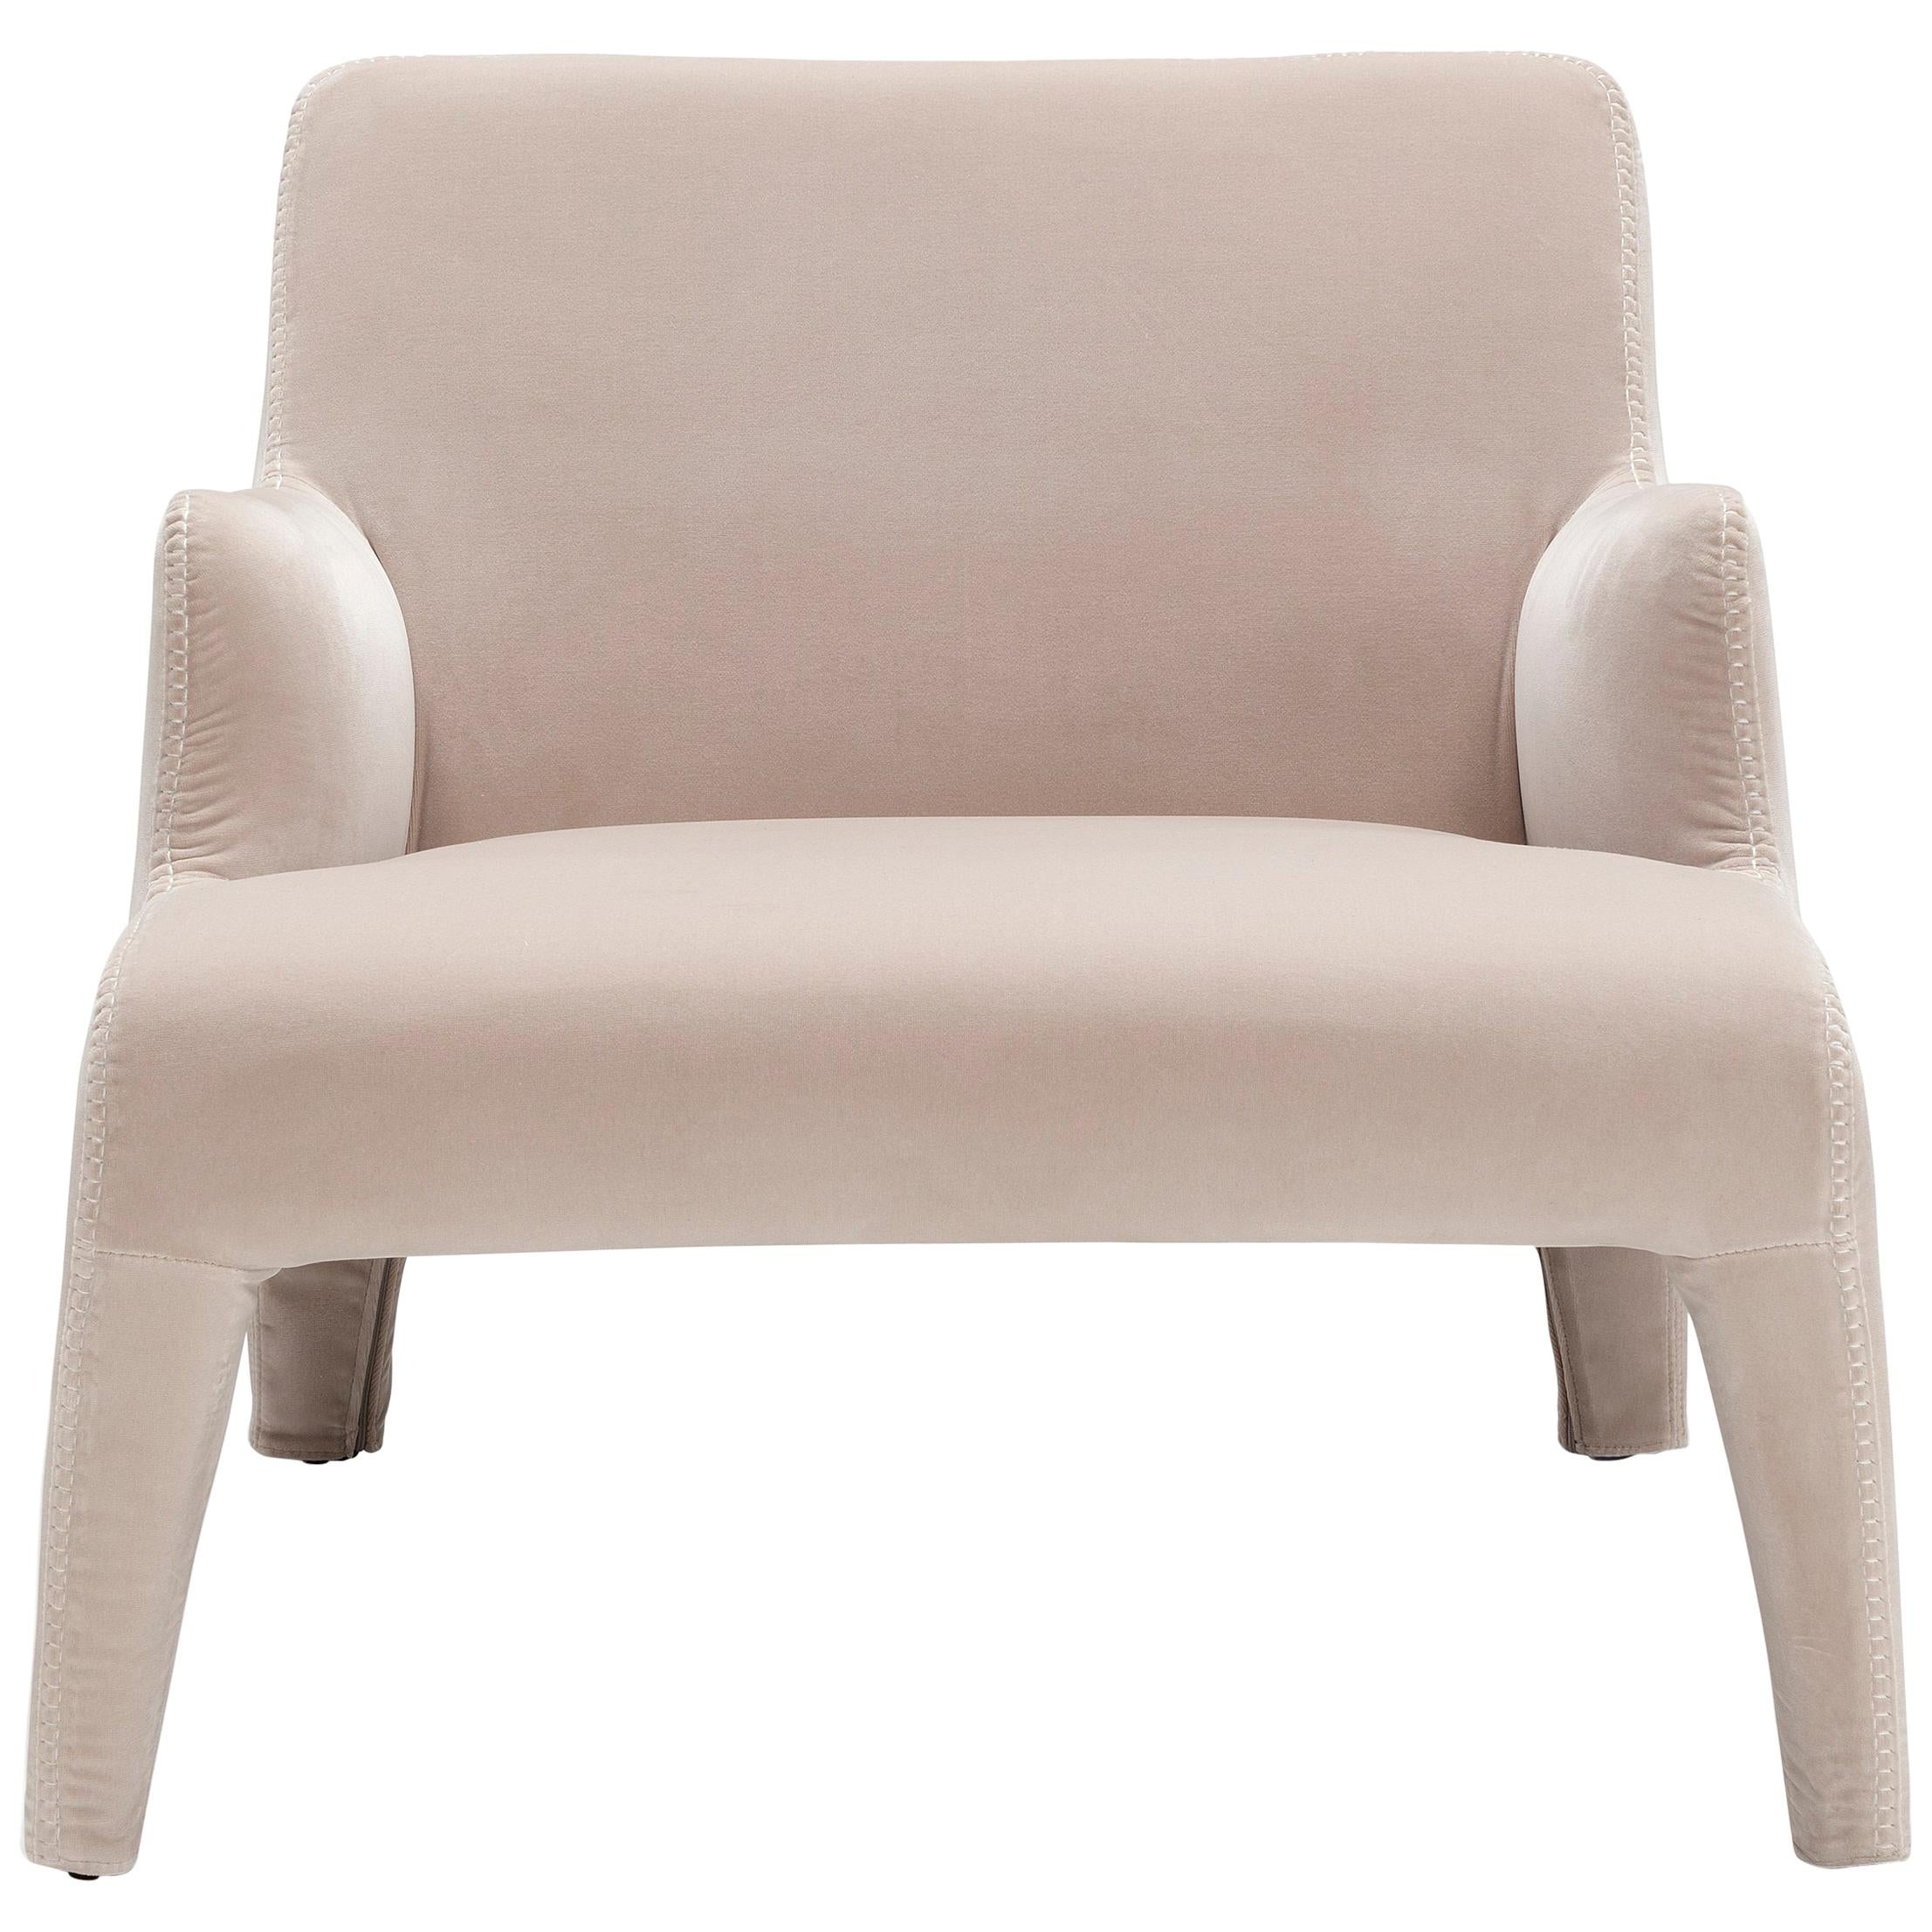 Amura 'Frida' Armchair in Ivory Velvet by Maurizio Marconato & Terry Zappa For Sale